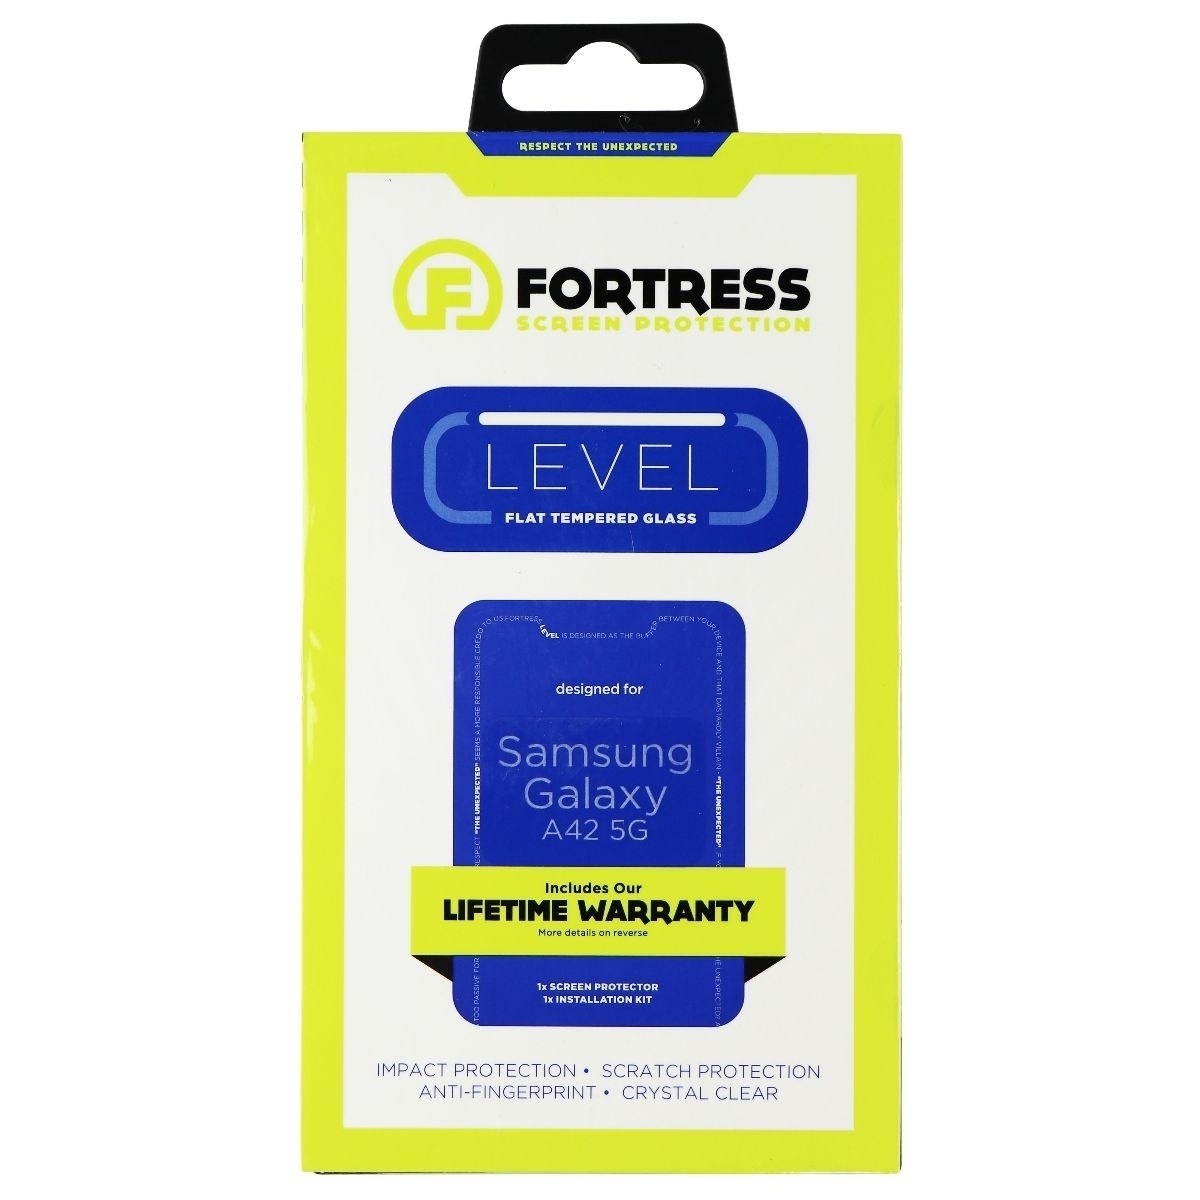 Fortress Flat Tempered Glass For Samsung Galaxy A42 5G - Clear